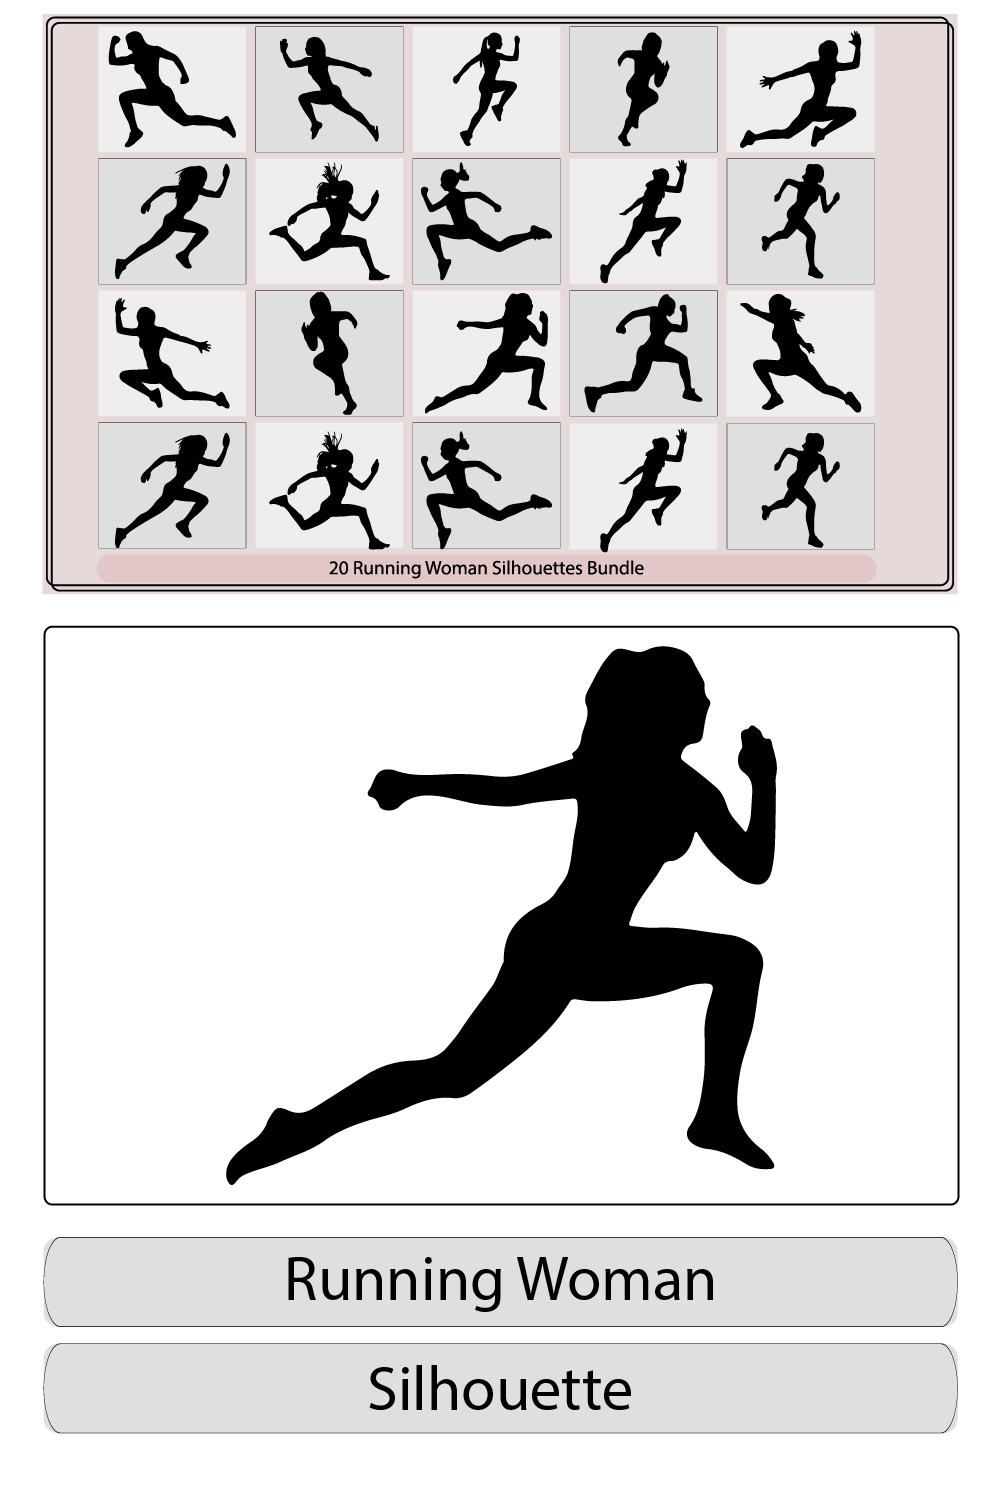 Running woman side view vector silhouette,Young running woman,Running woman silhouette,Running woman or female fitness,Set running silhouettes pinterest preview image.